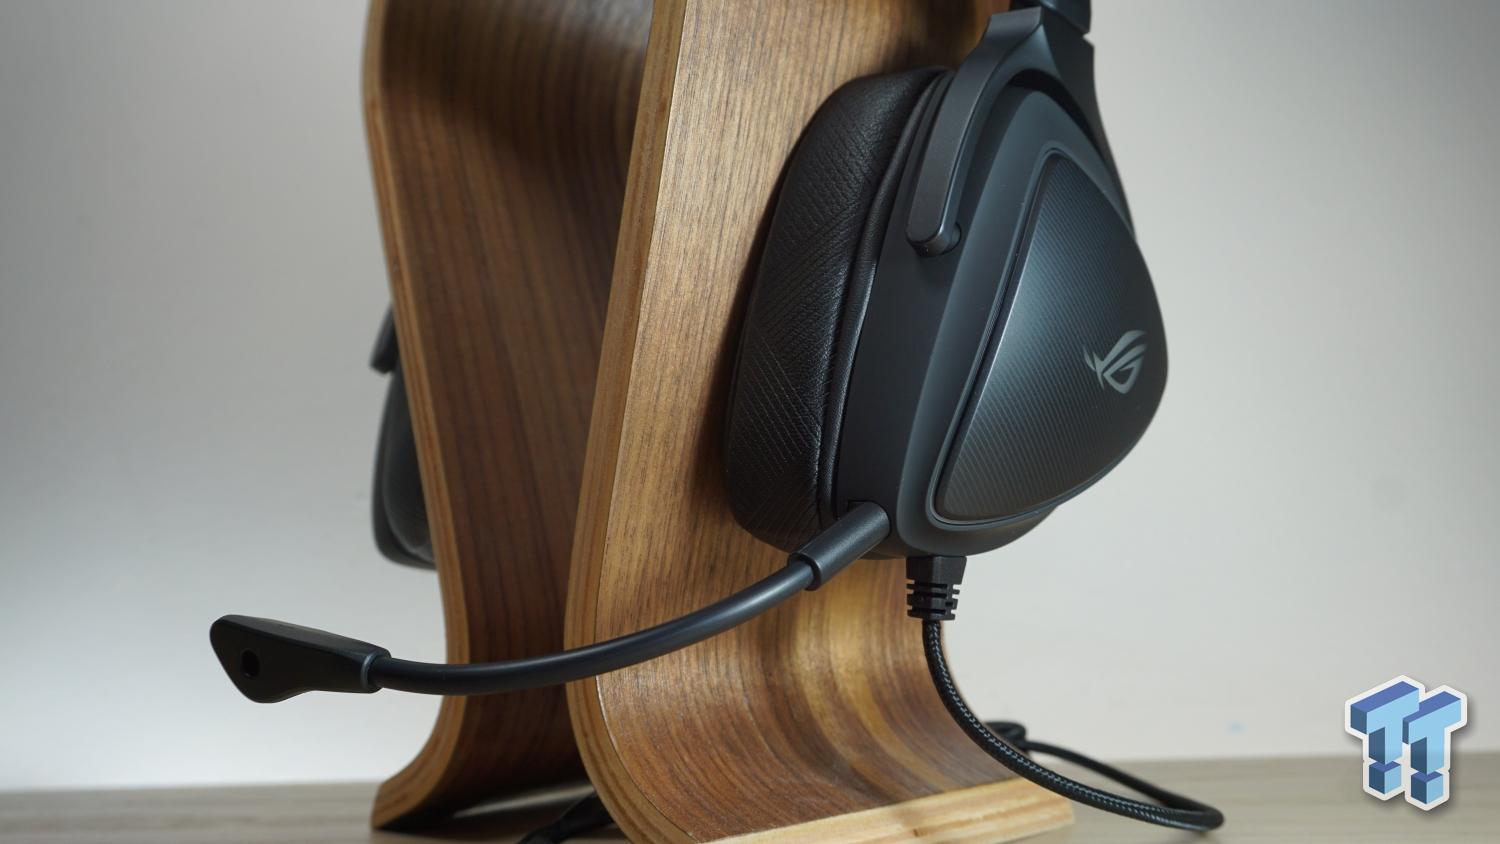 Review ASUS ROG Delta: Excellent sound for audiophile gamers